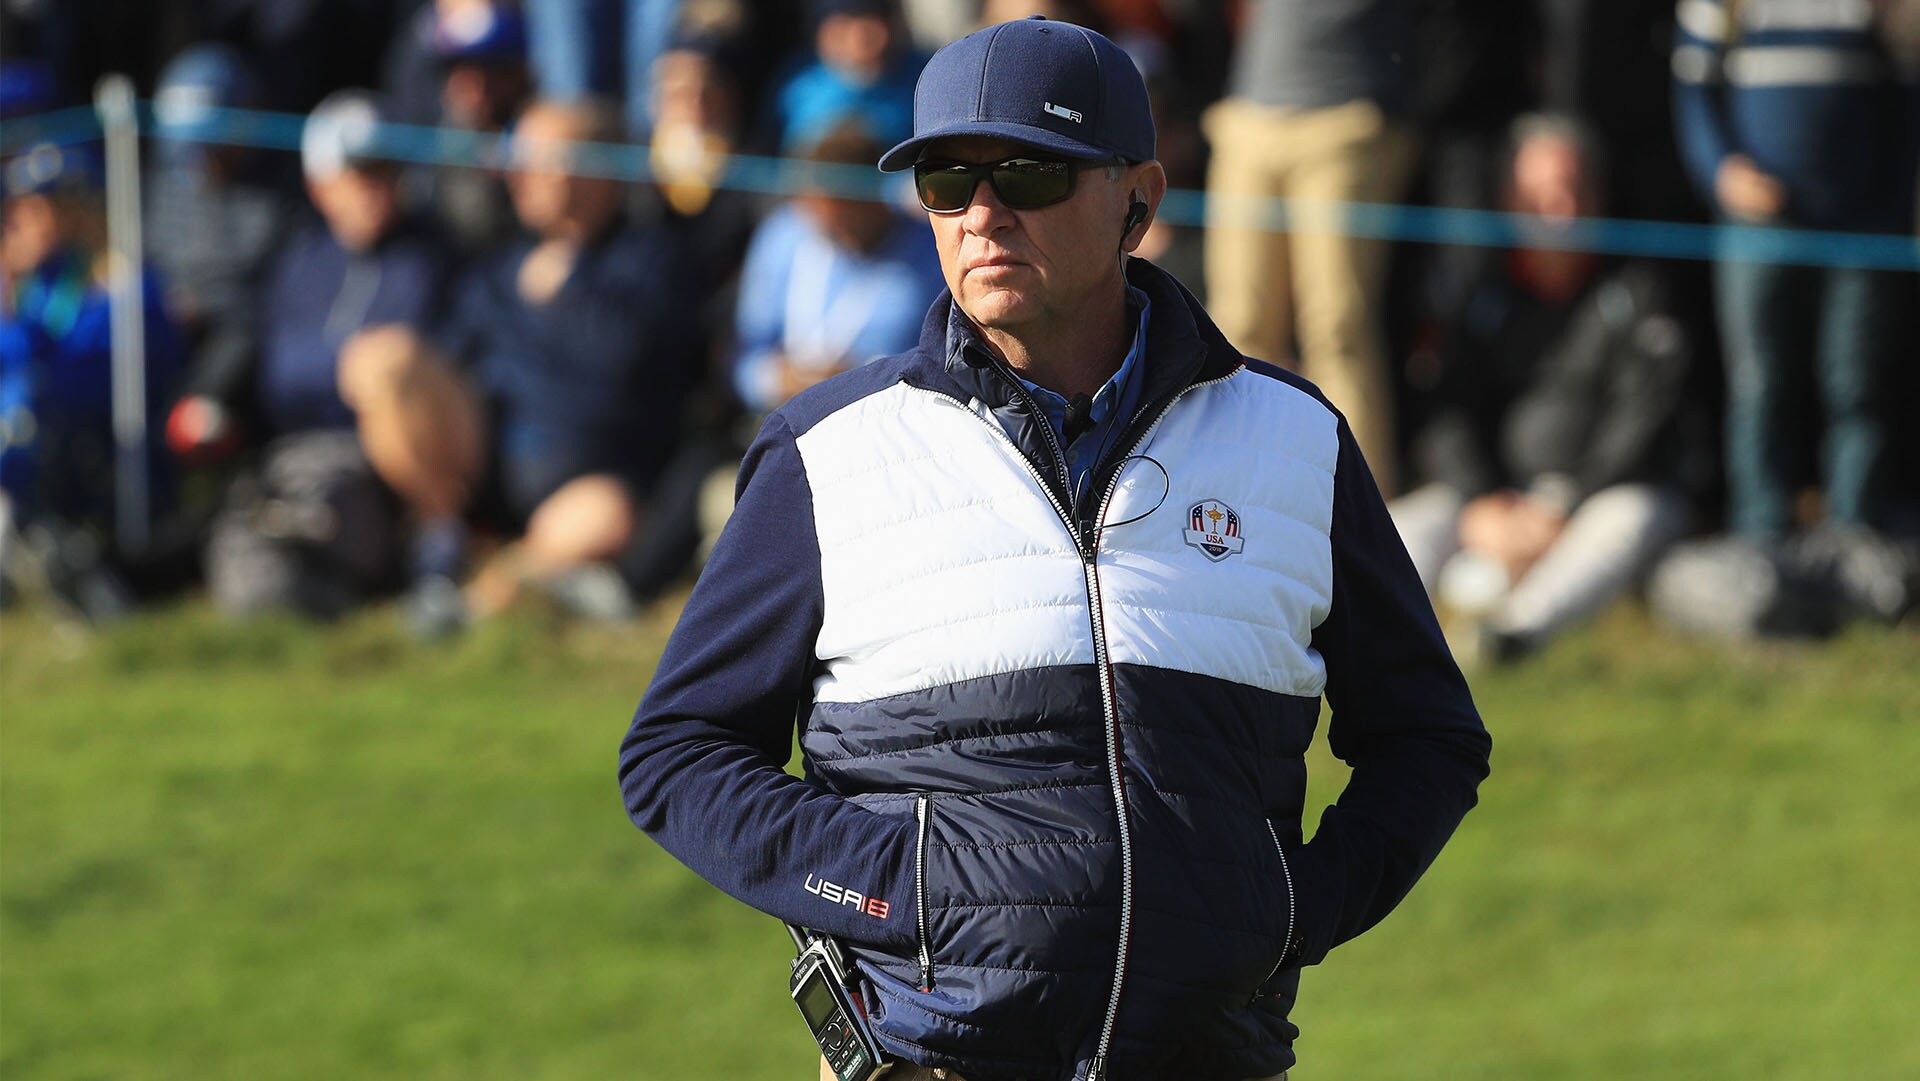 Davis Love III on Ryder Cup captain’s picks: ‘Take top 12 and be done’